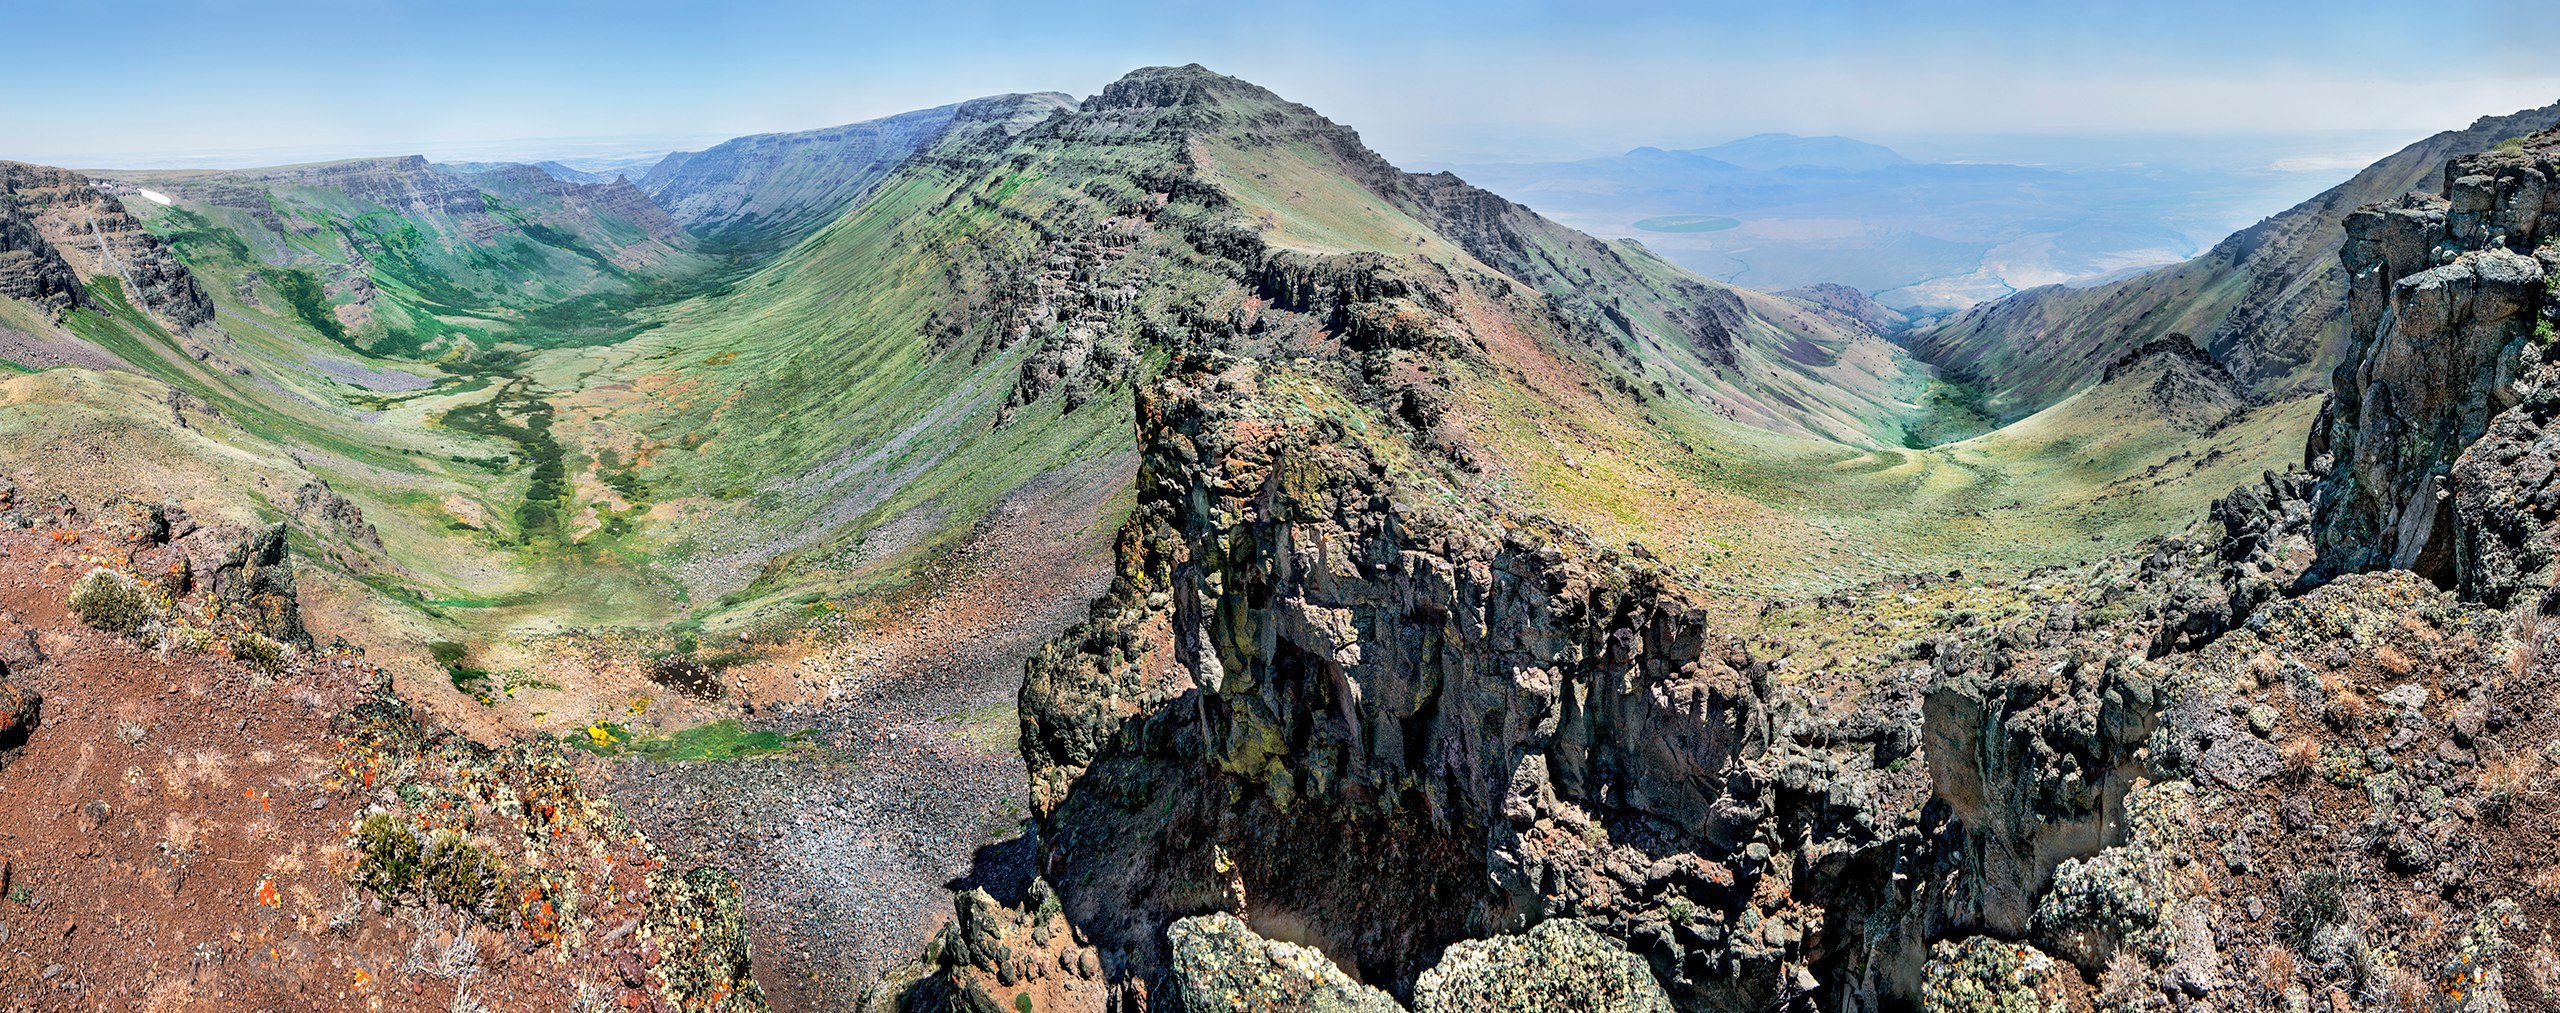 Kiger and Mosquito Gorges, Steens Mountain, Oregon